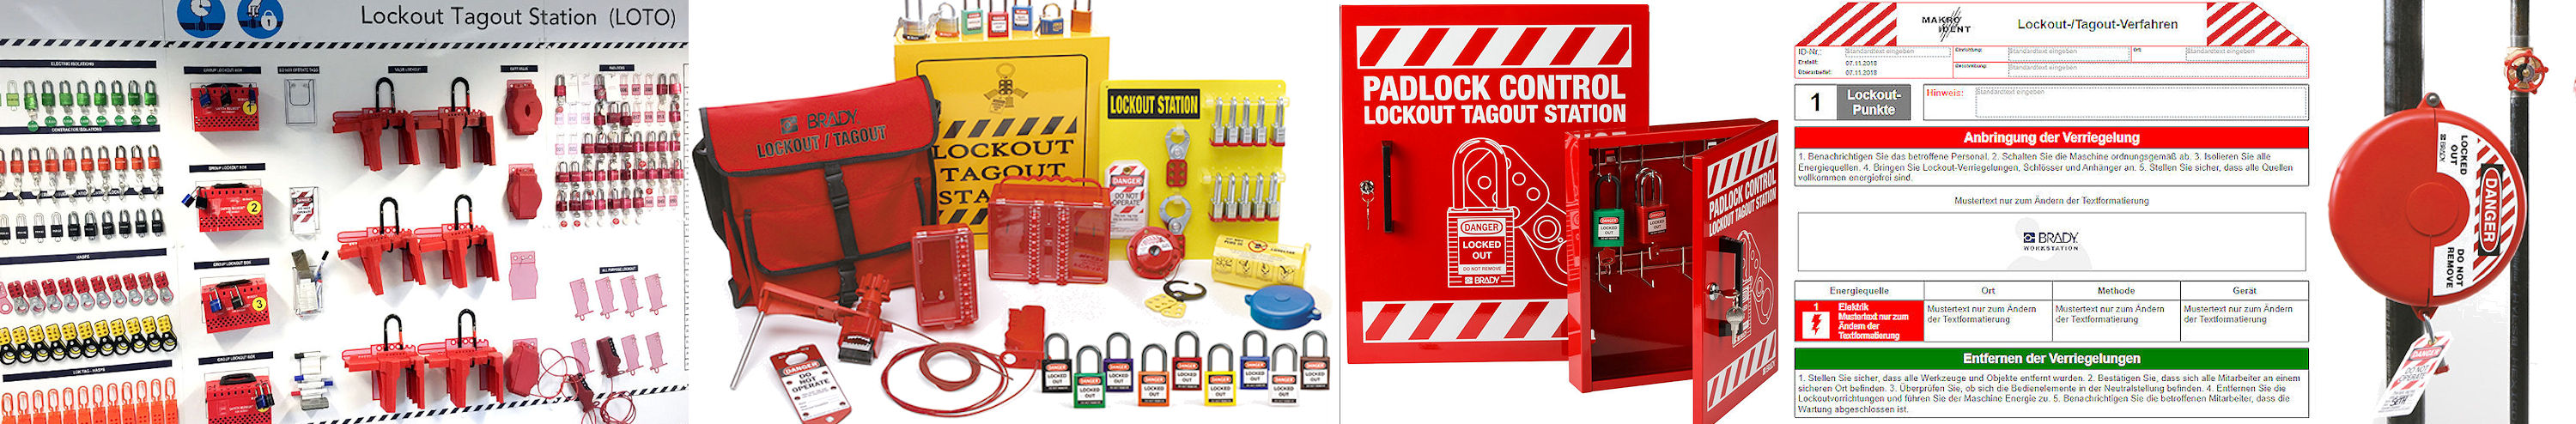 Was ist Lockout Tagout?